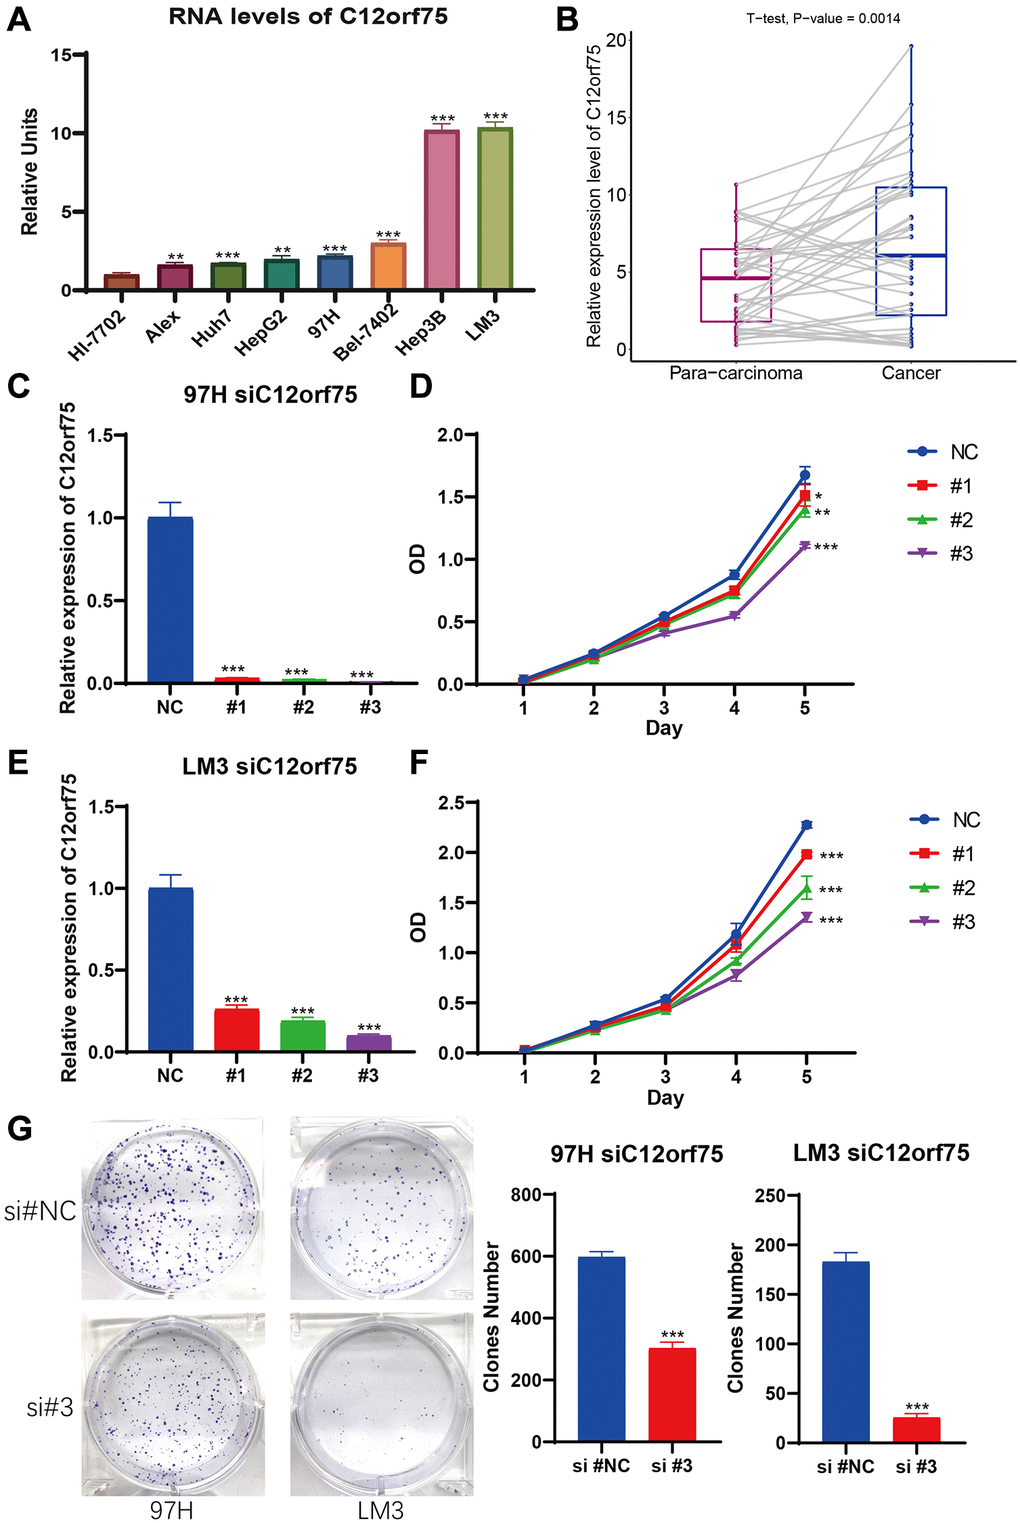 C12orf75 was the high expression in liver cancer cell lines and patient samples and knockdown C12orf75 suppresses LIHC proliferation. (A) Analysis of C12orf75 expression in HCC and normal liver cell lines. Compared to normal liver cell line HL-7702, C12orf75 was remarkably upregulated in several HCC cell lines: Alex, Huh7, HepG2, 97H, Bel-7402, Hep3B, and, LM3. Fold change = log2 ∆∆Ct, log2 ∆∆Ct = (CtGAPDH − Ct C12orf75) of test cell lines − (CtGAPDH − CtC12orf75) of Hl-7702. (B) Relative expression of C12orf75 in clinical HCC and adjacent liver tissues. C12orf75 expression was significantly higher in HCC tissues than that in adjacent liver tissues (p = 0.002, number of patients = 20). (C) RT-PCR was used to detect the efficiency of knockdown for C12orf75 in 97H. (D) 97H were treated with siRNA against C12orf75 for 24 hours and then subjected to the CCK-8 assay. (E) RT-PCR was used to detect the efficiency of knockdown for C12orf75 in LM3. (F) LM3 were treated with siRNA against C12orf75 for 24 hours and then subjected to the CCK-8 assay. (G) 97H and LM3 were treated with siRNA against C12orf75 for 24 hours and then subjected to the colony formation assay. *p **p ***p 